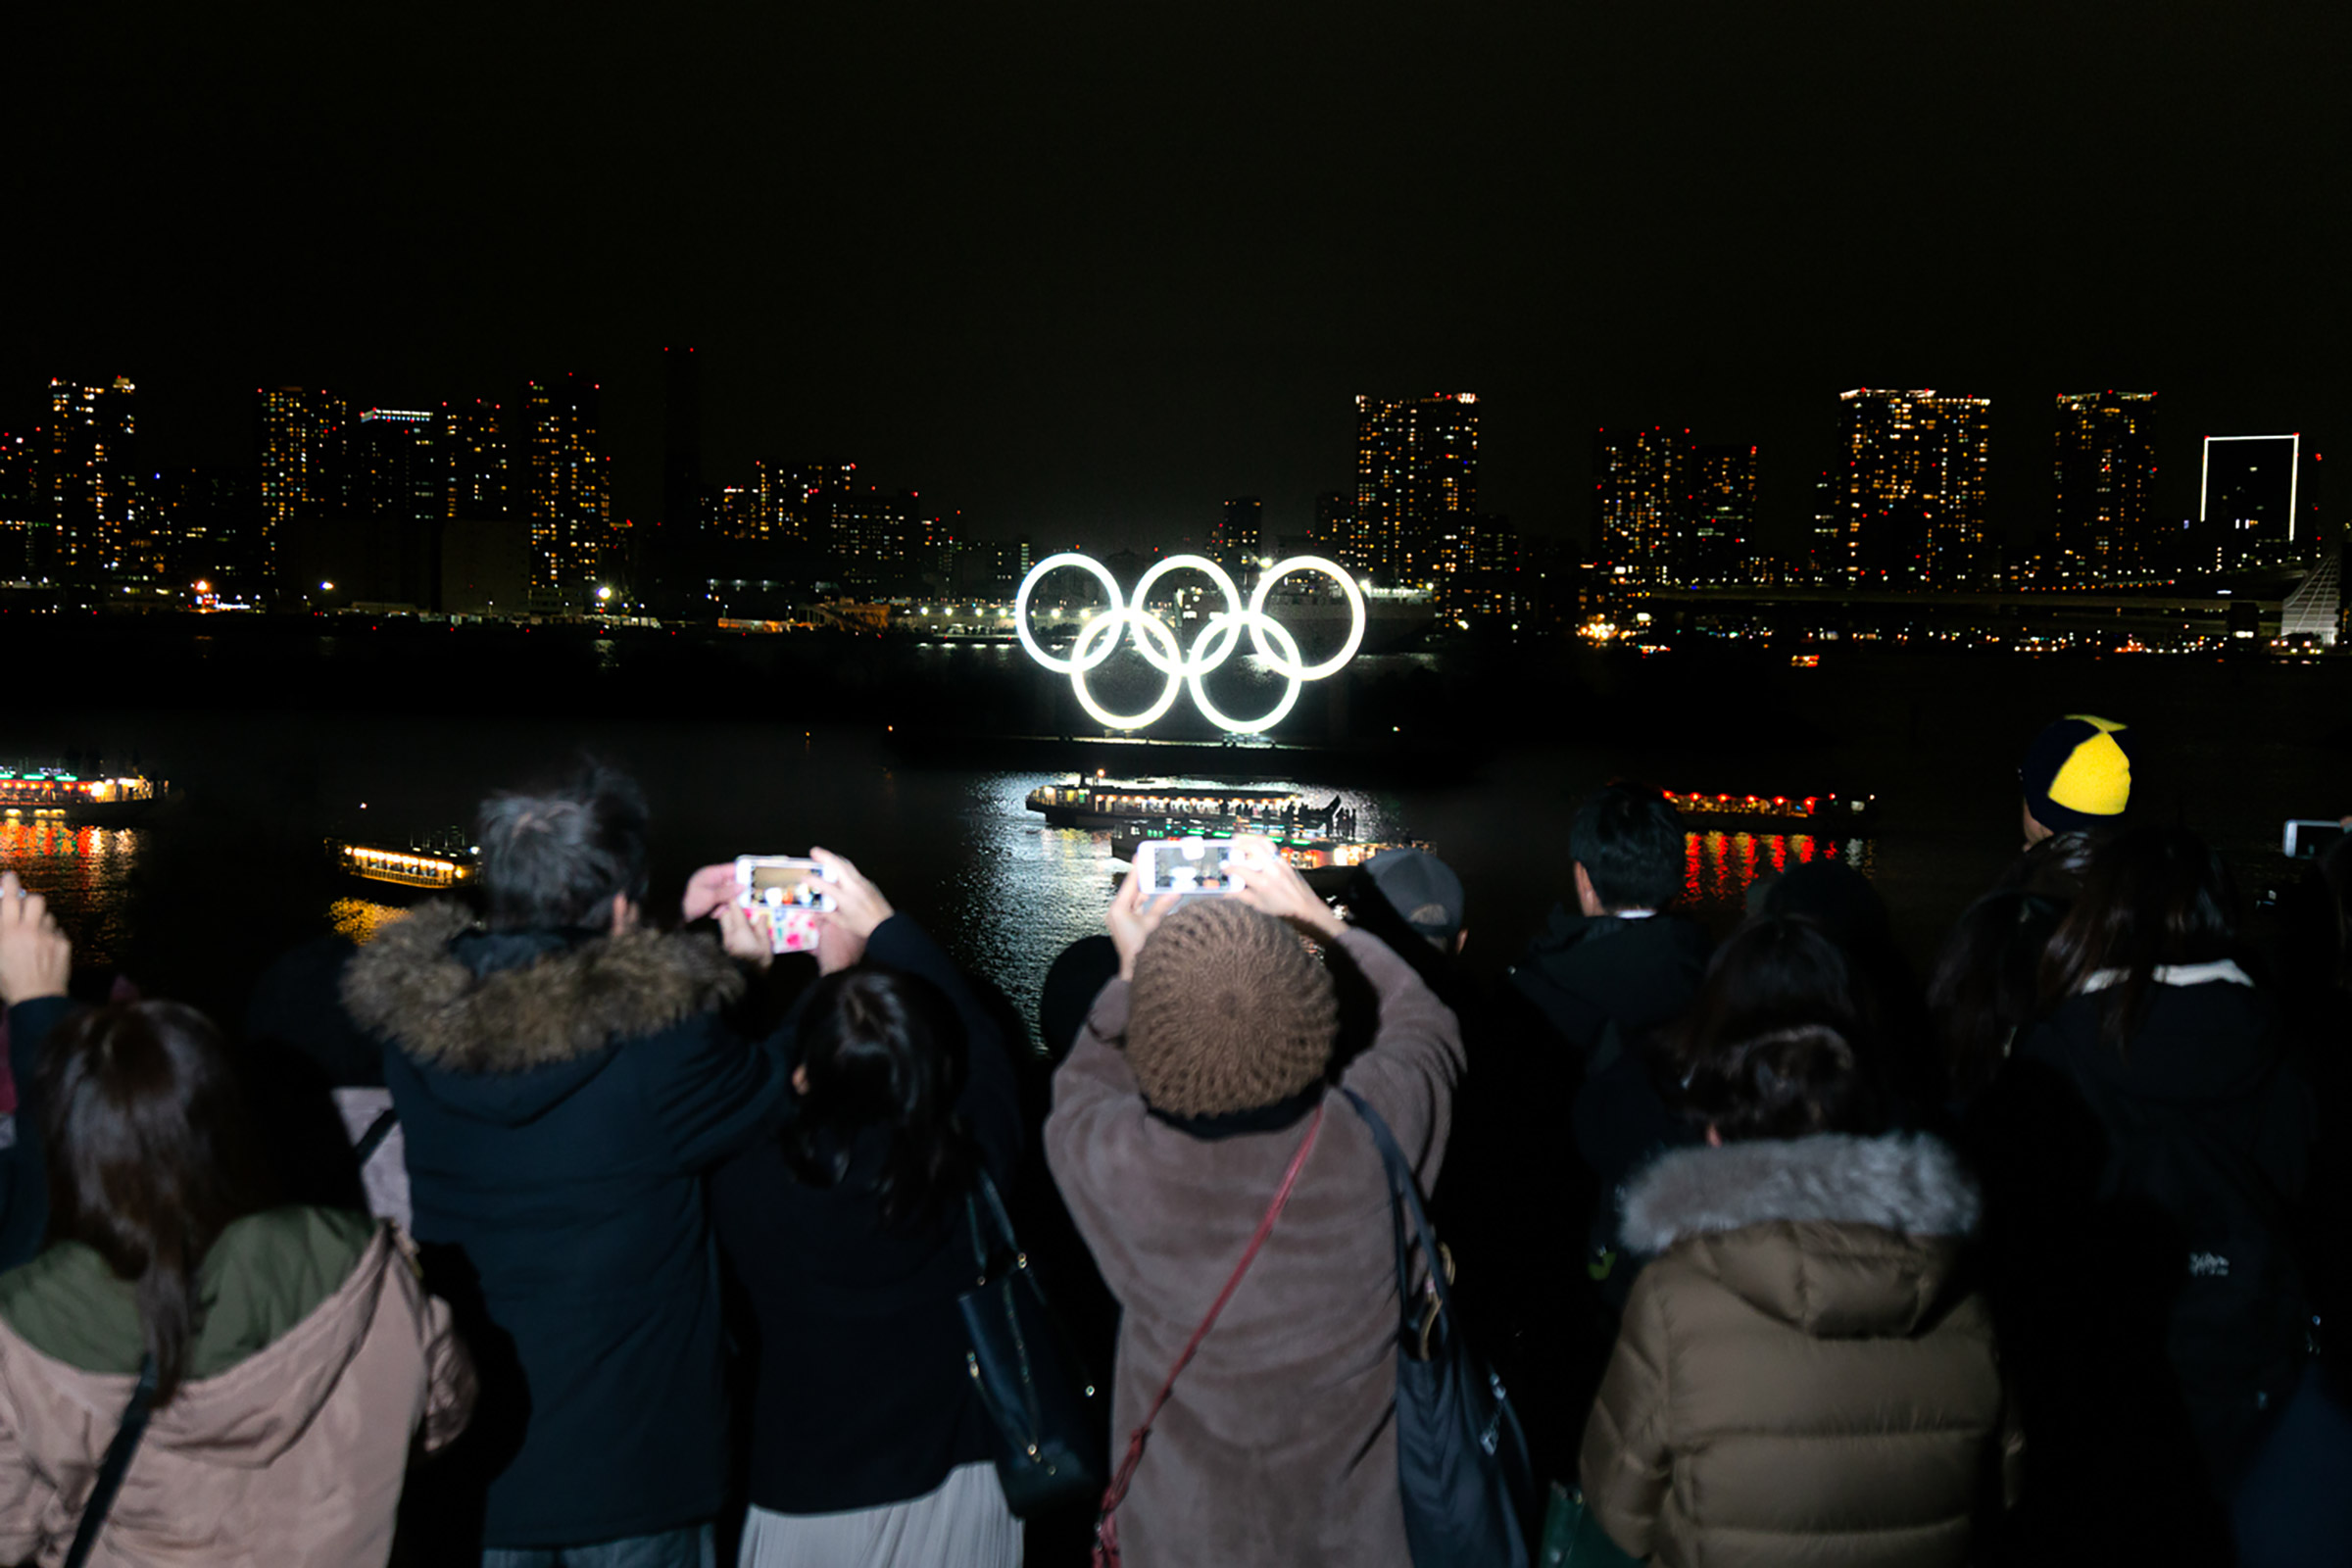 Olympic logo at Odaiba area.Open water swimming and triathlon are planned for this area.